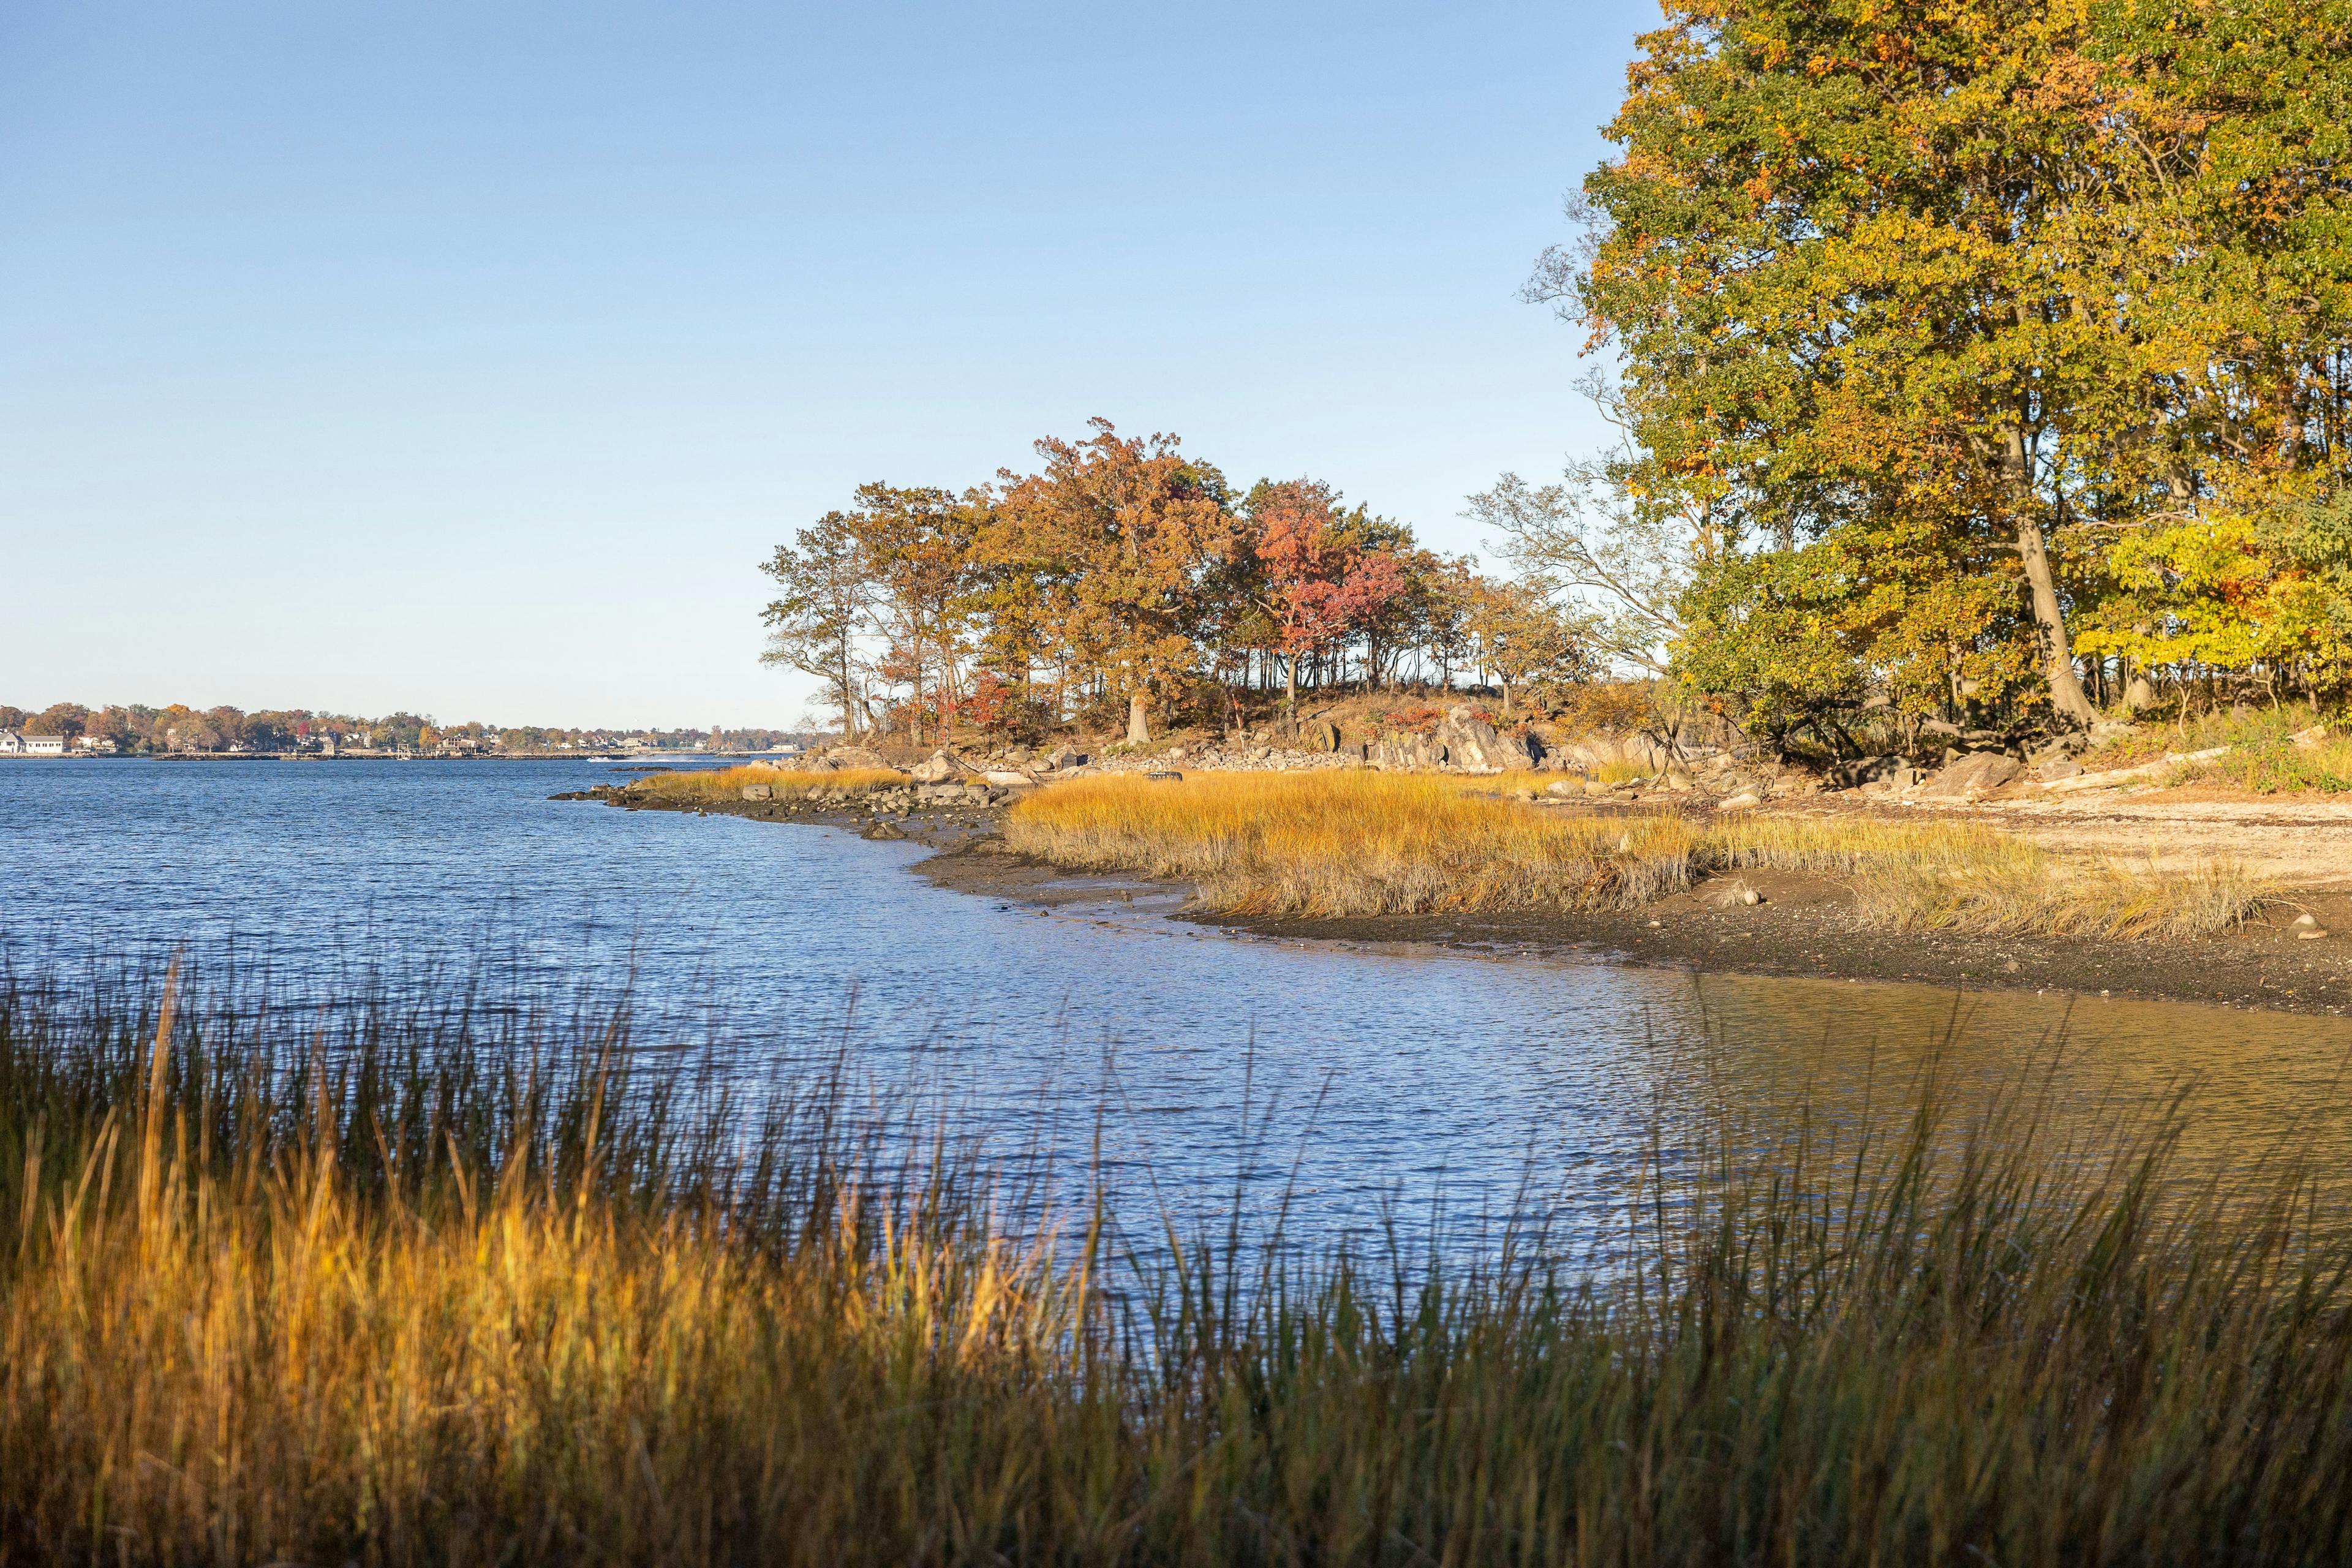 An image of Wetland Conservation New York